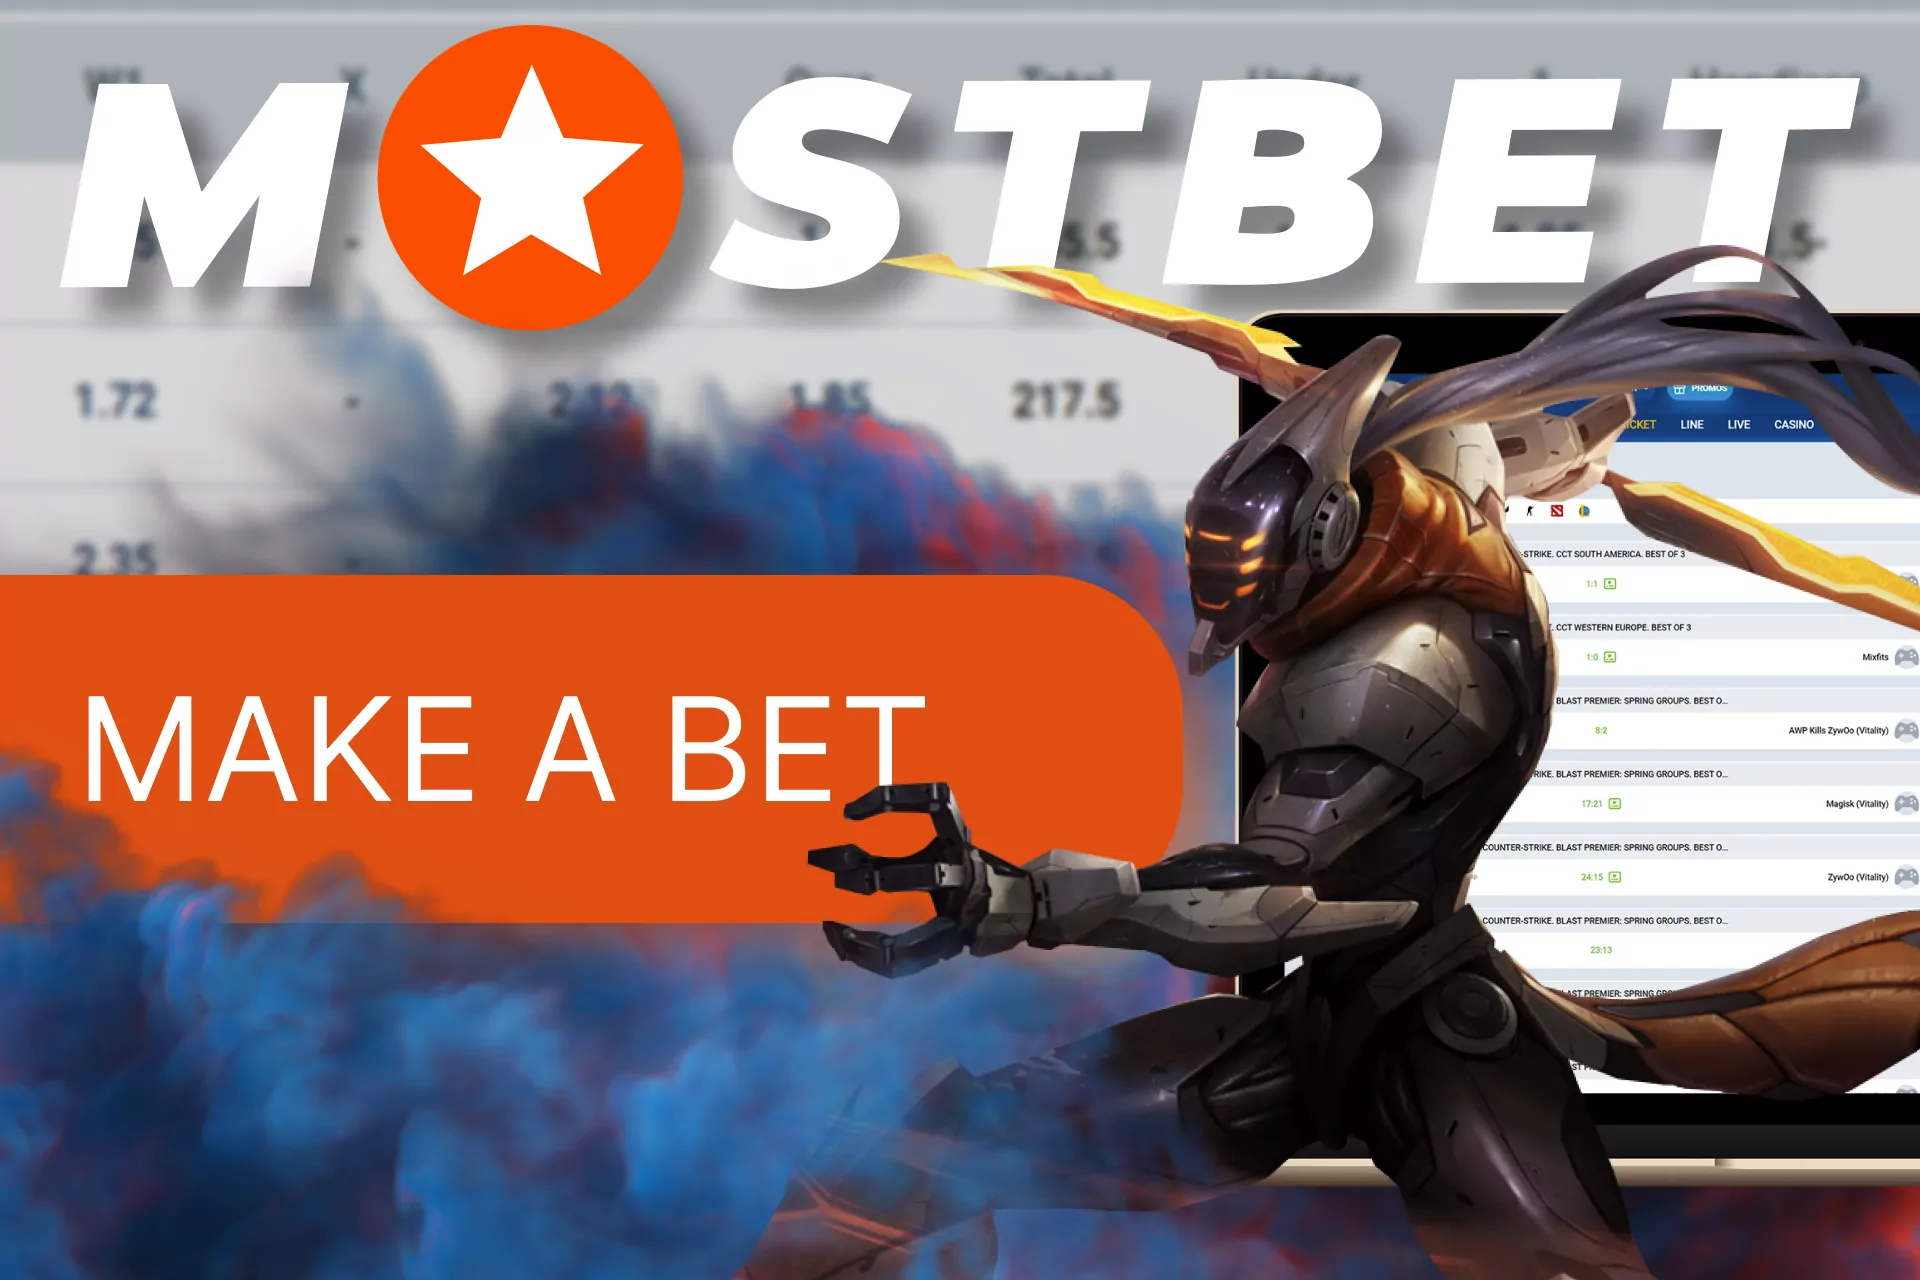 With Mostbet you can bet on esports online.